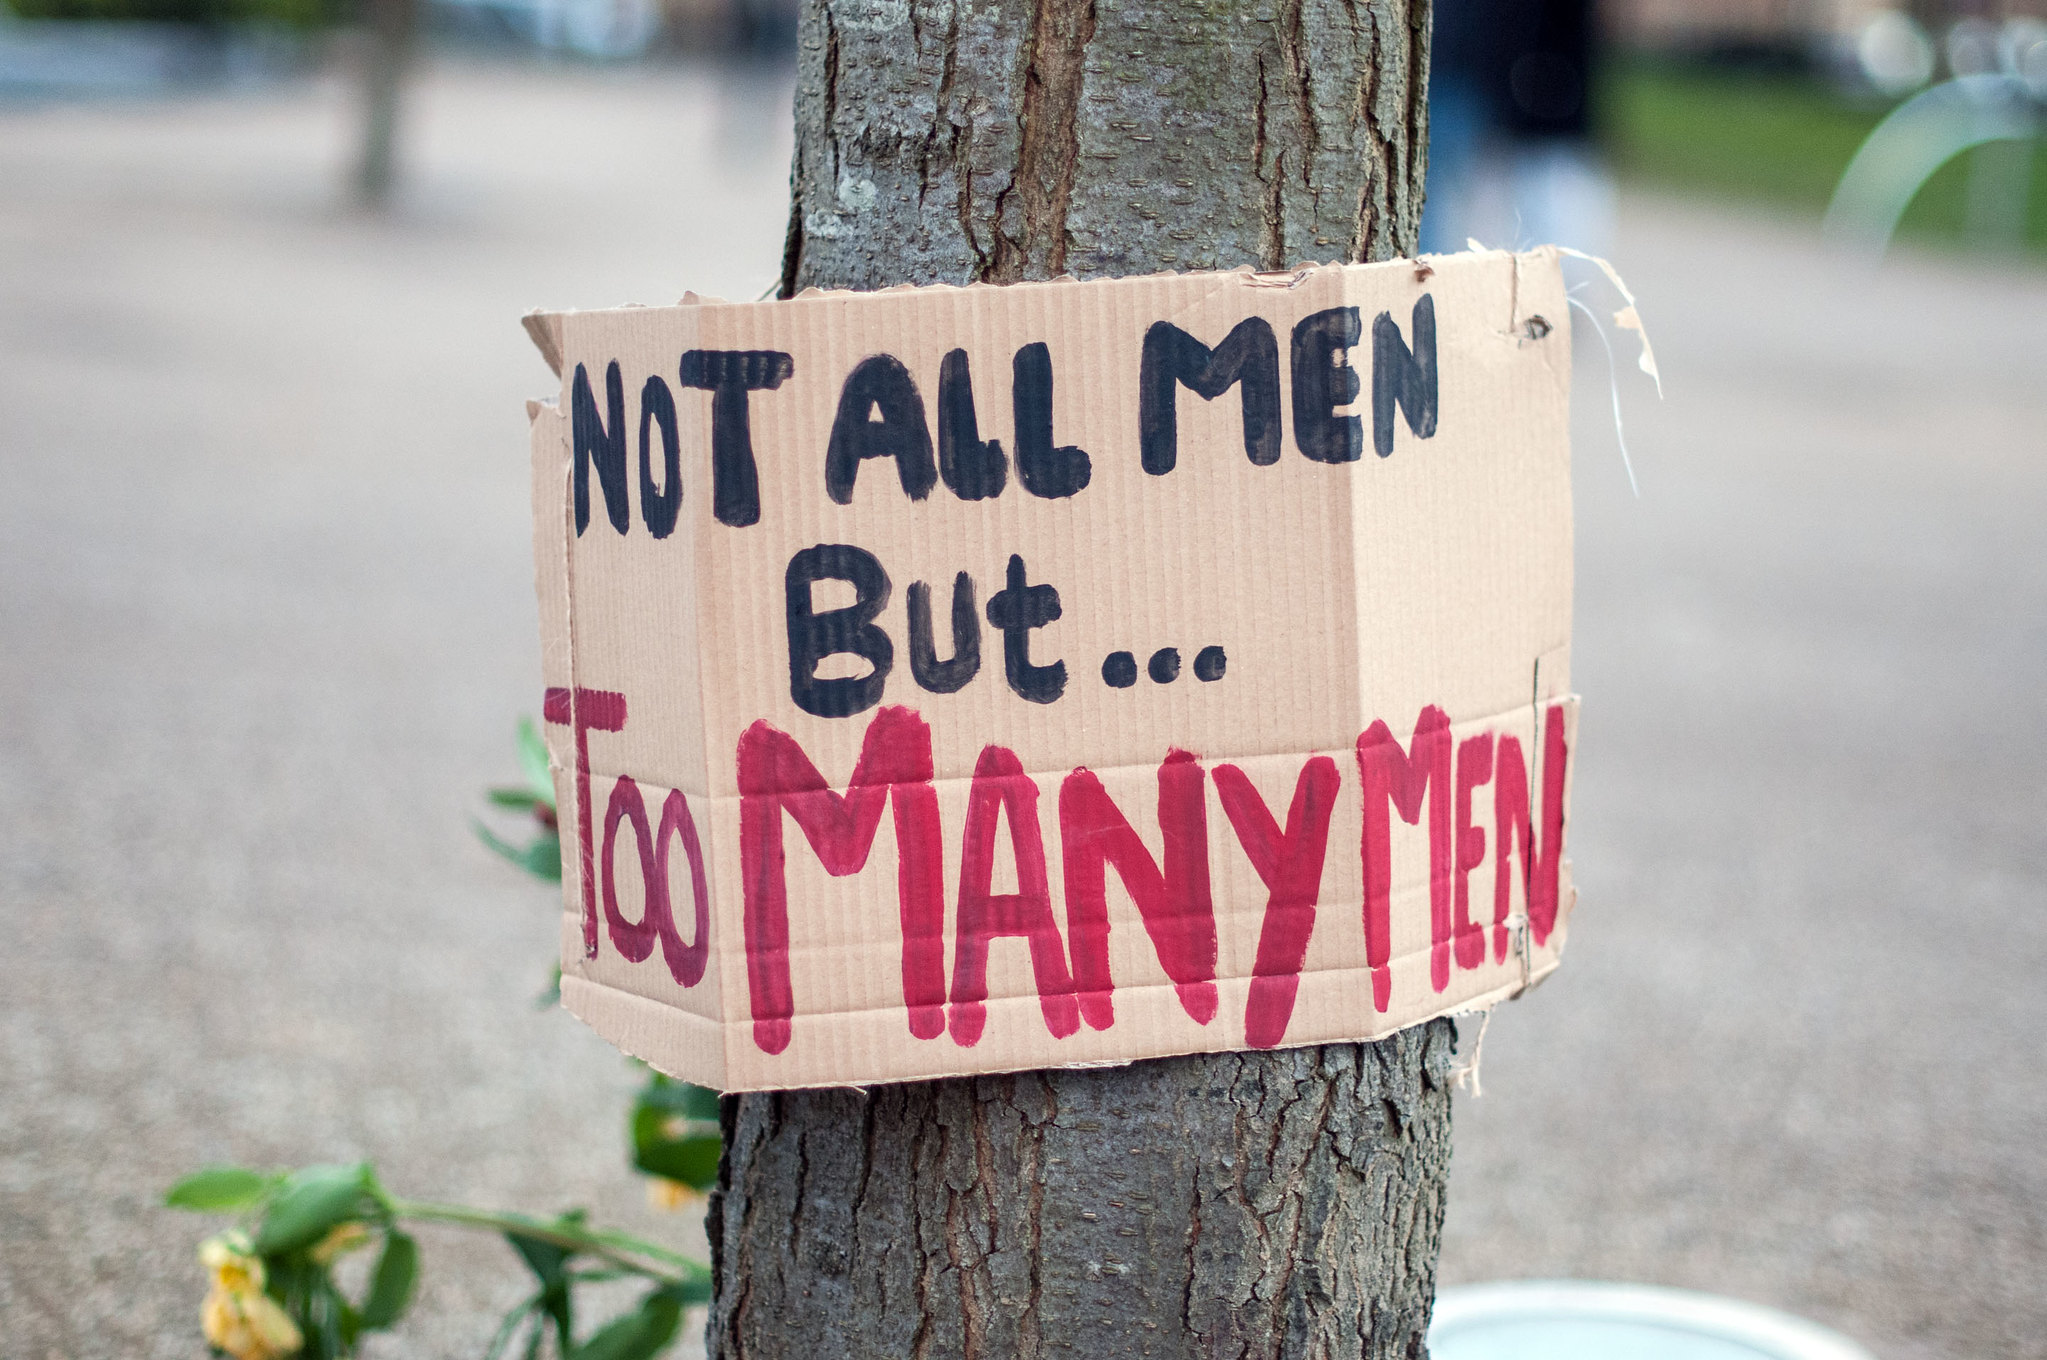 A sign fixed to a tree trunk reads "not all men but...." in black ink followed by "too many men" in red capital letters.